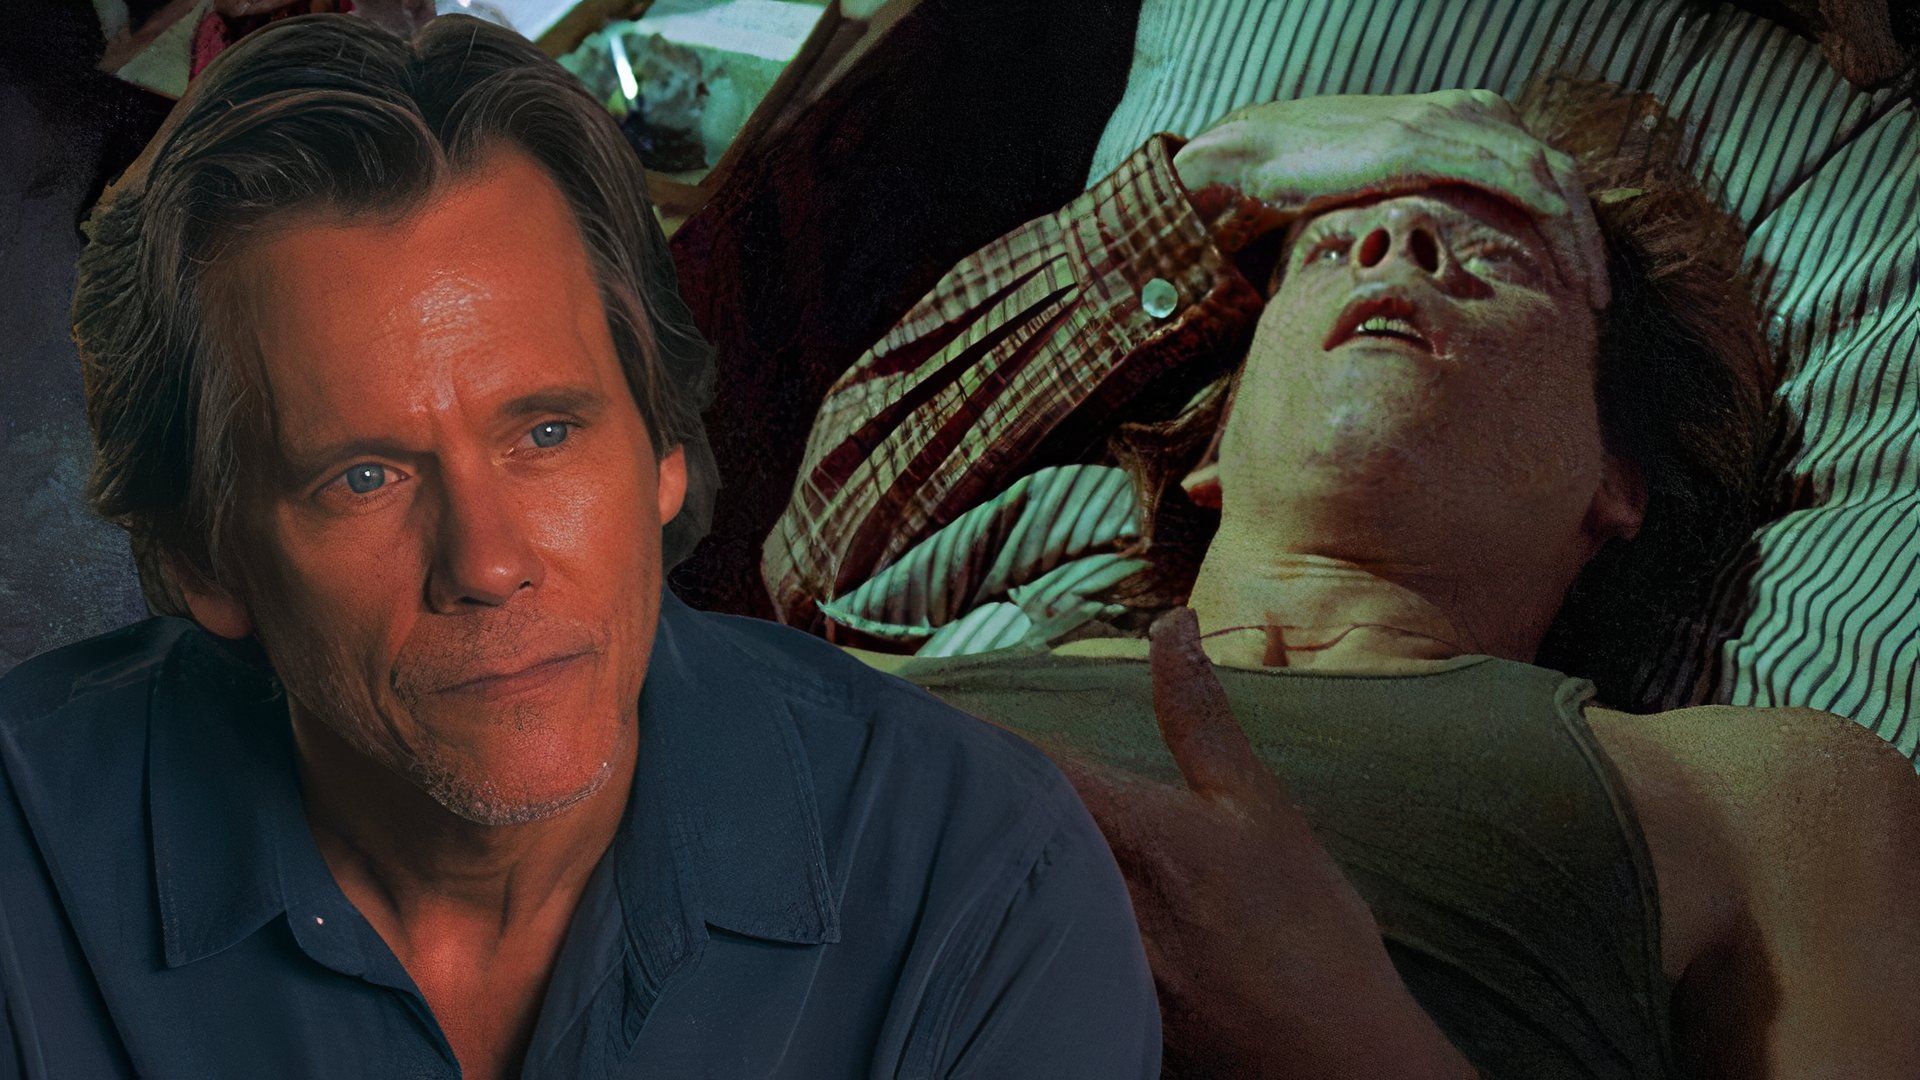 Kevin Bacon & Family Recreate His Friday the 13th Death Scene